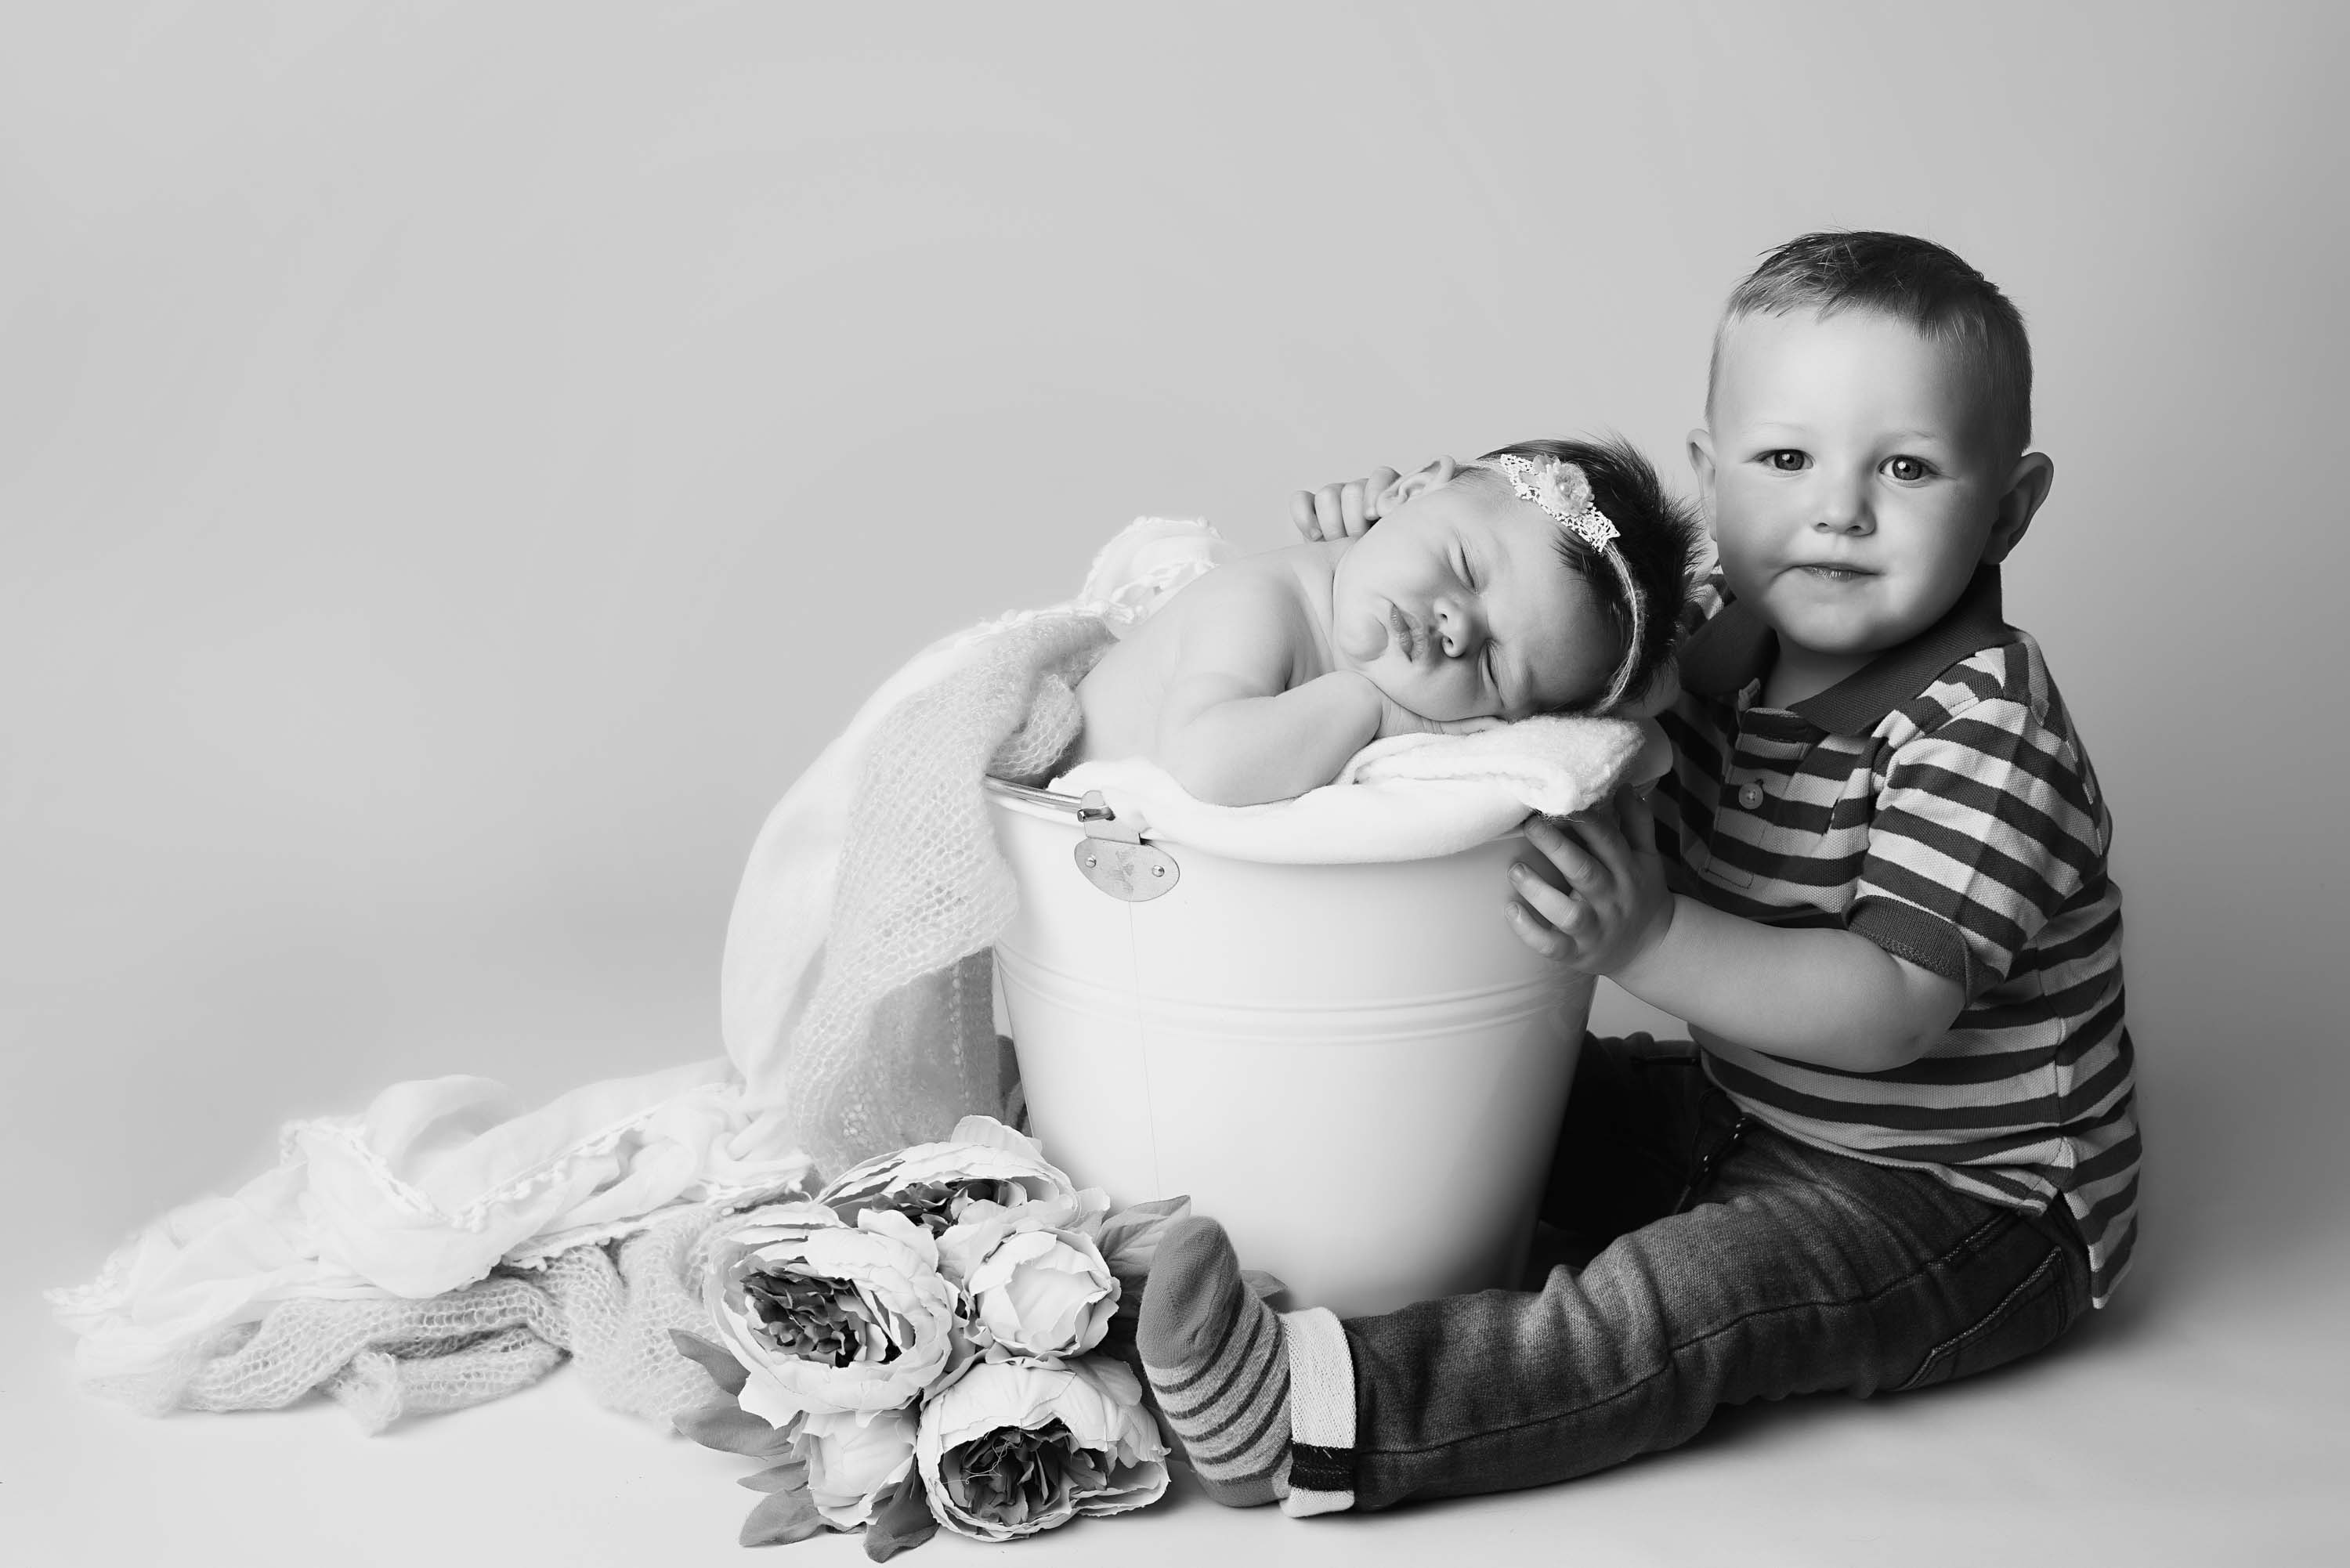 Photo of siblings. Brother sitting next to baby girl who is posed in a bucket